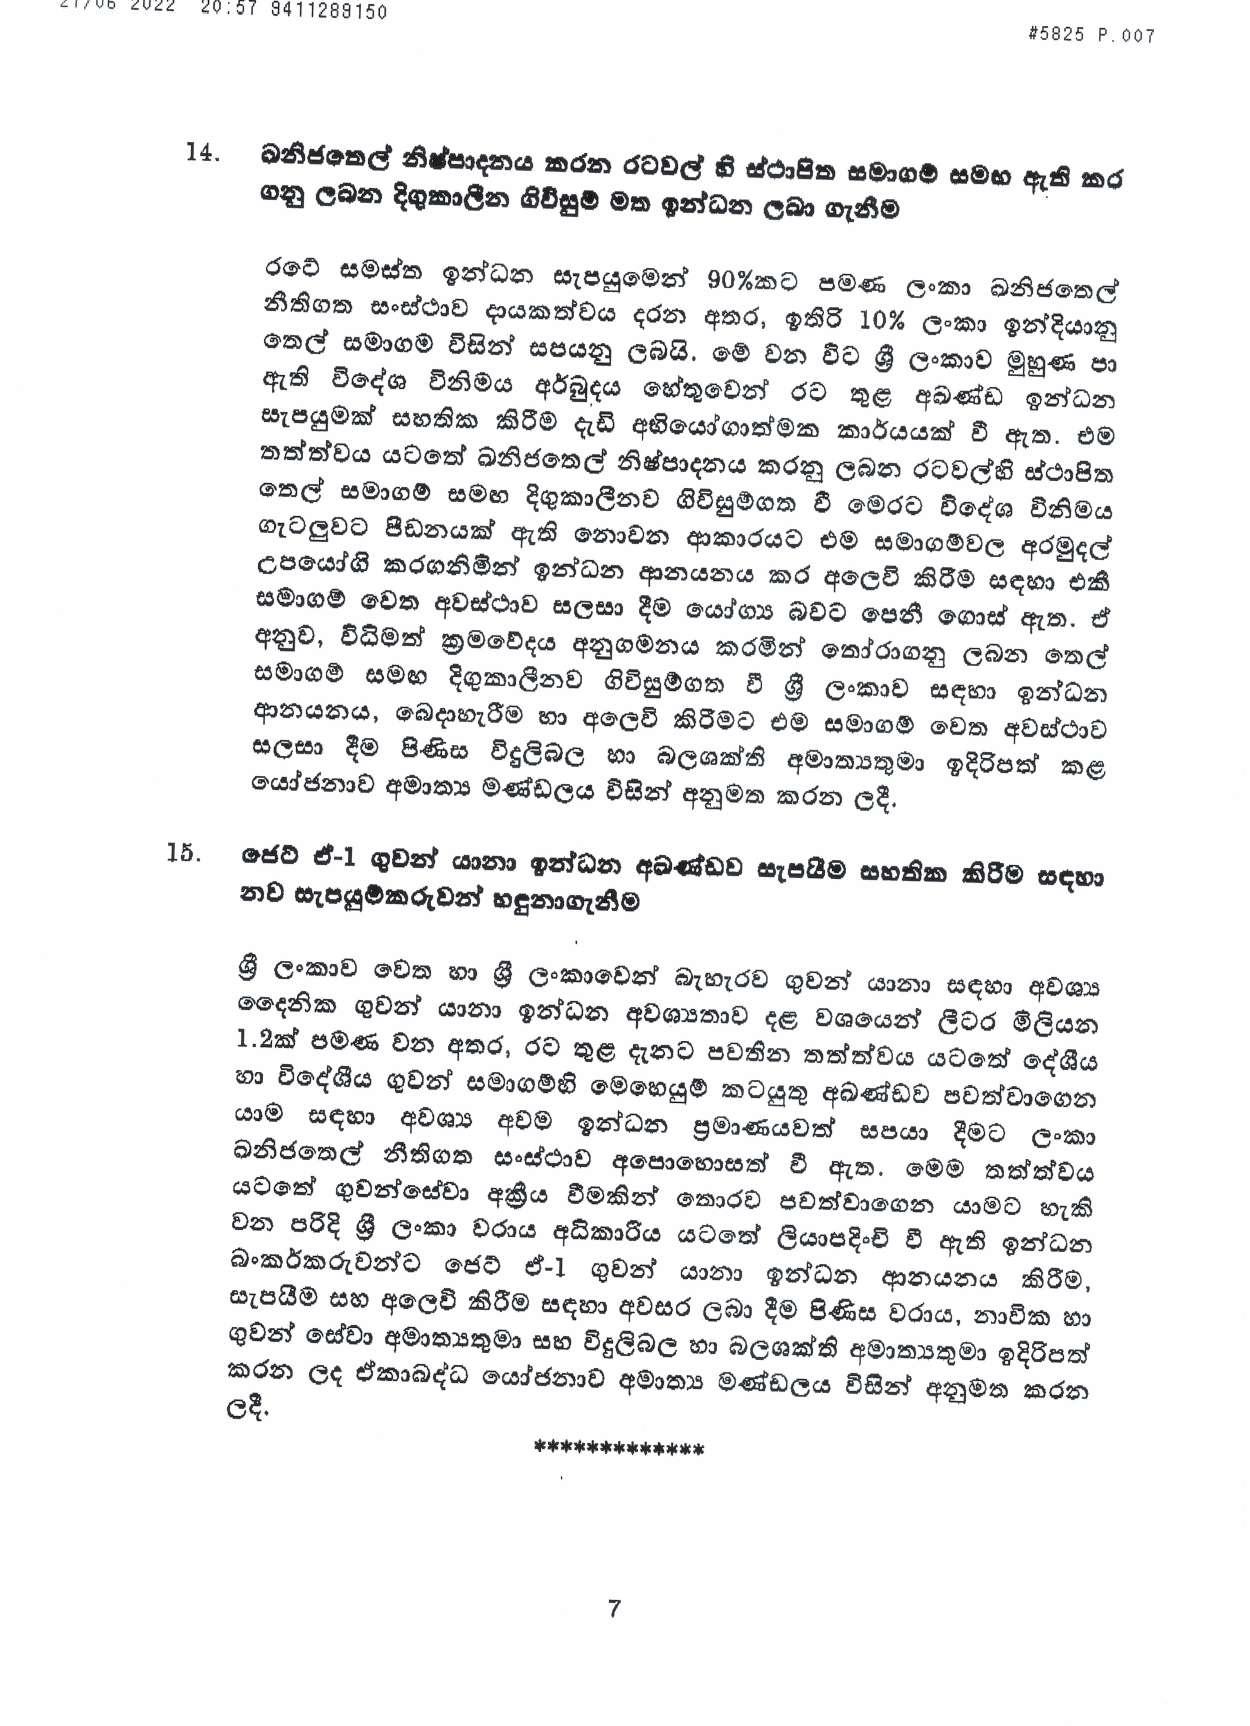 Cabinet Decisions on 27.06.2022 S page 007